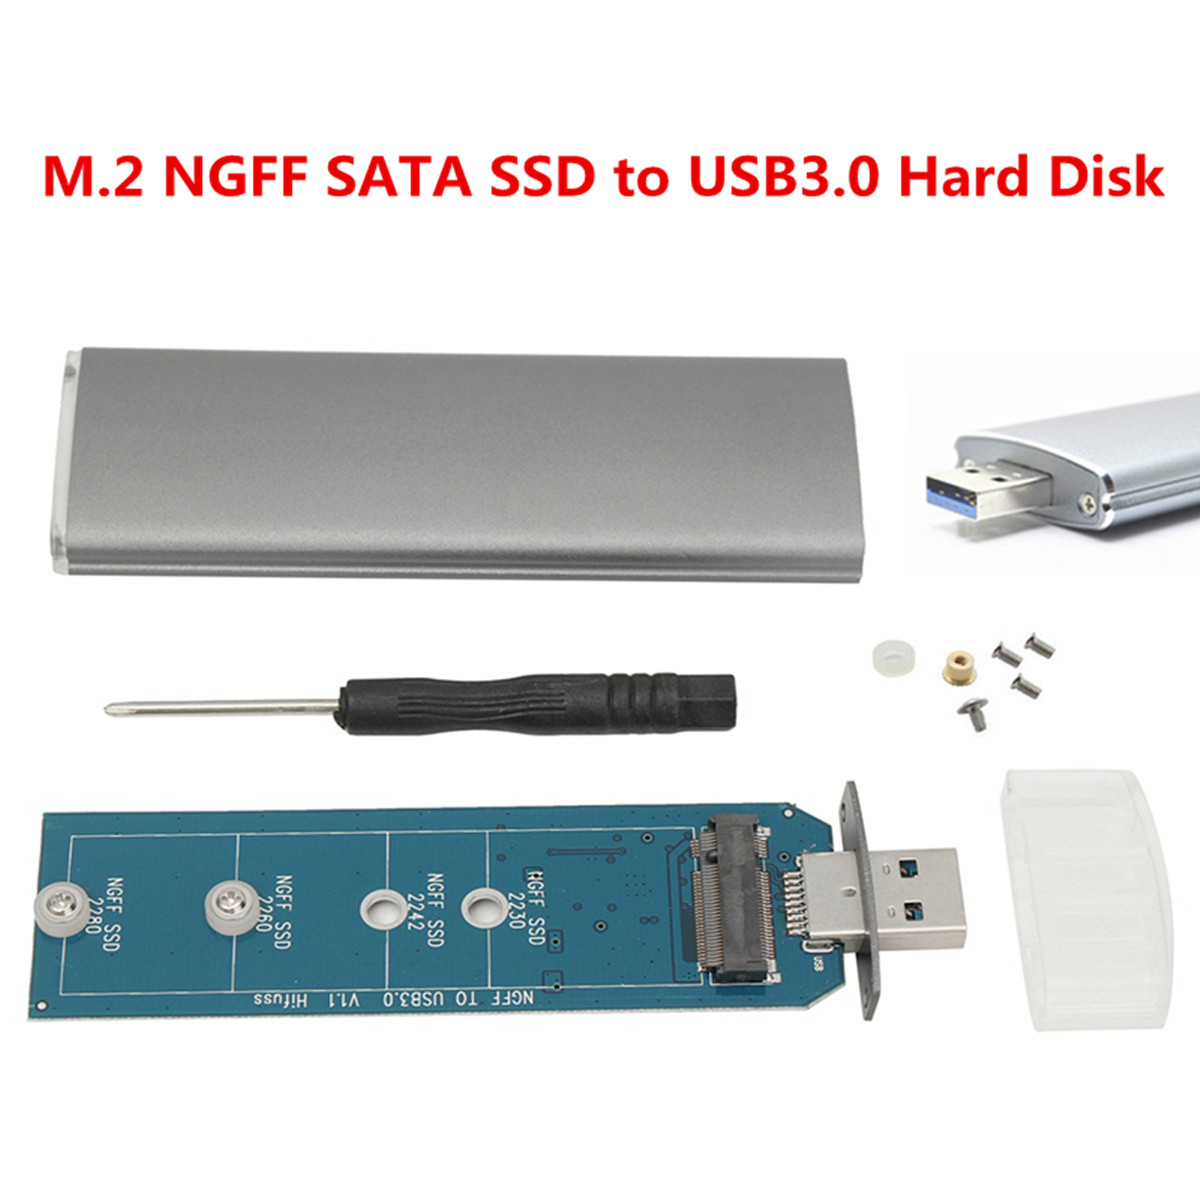 M.2 NGFF SSD SATA to USB 3.0 Converter Adapter External Enclosure Mobile SSD Case 38